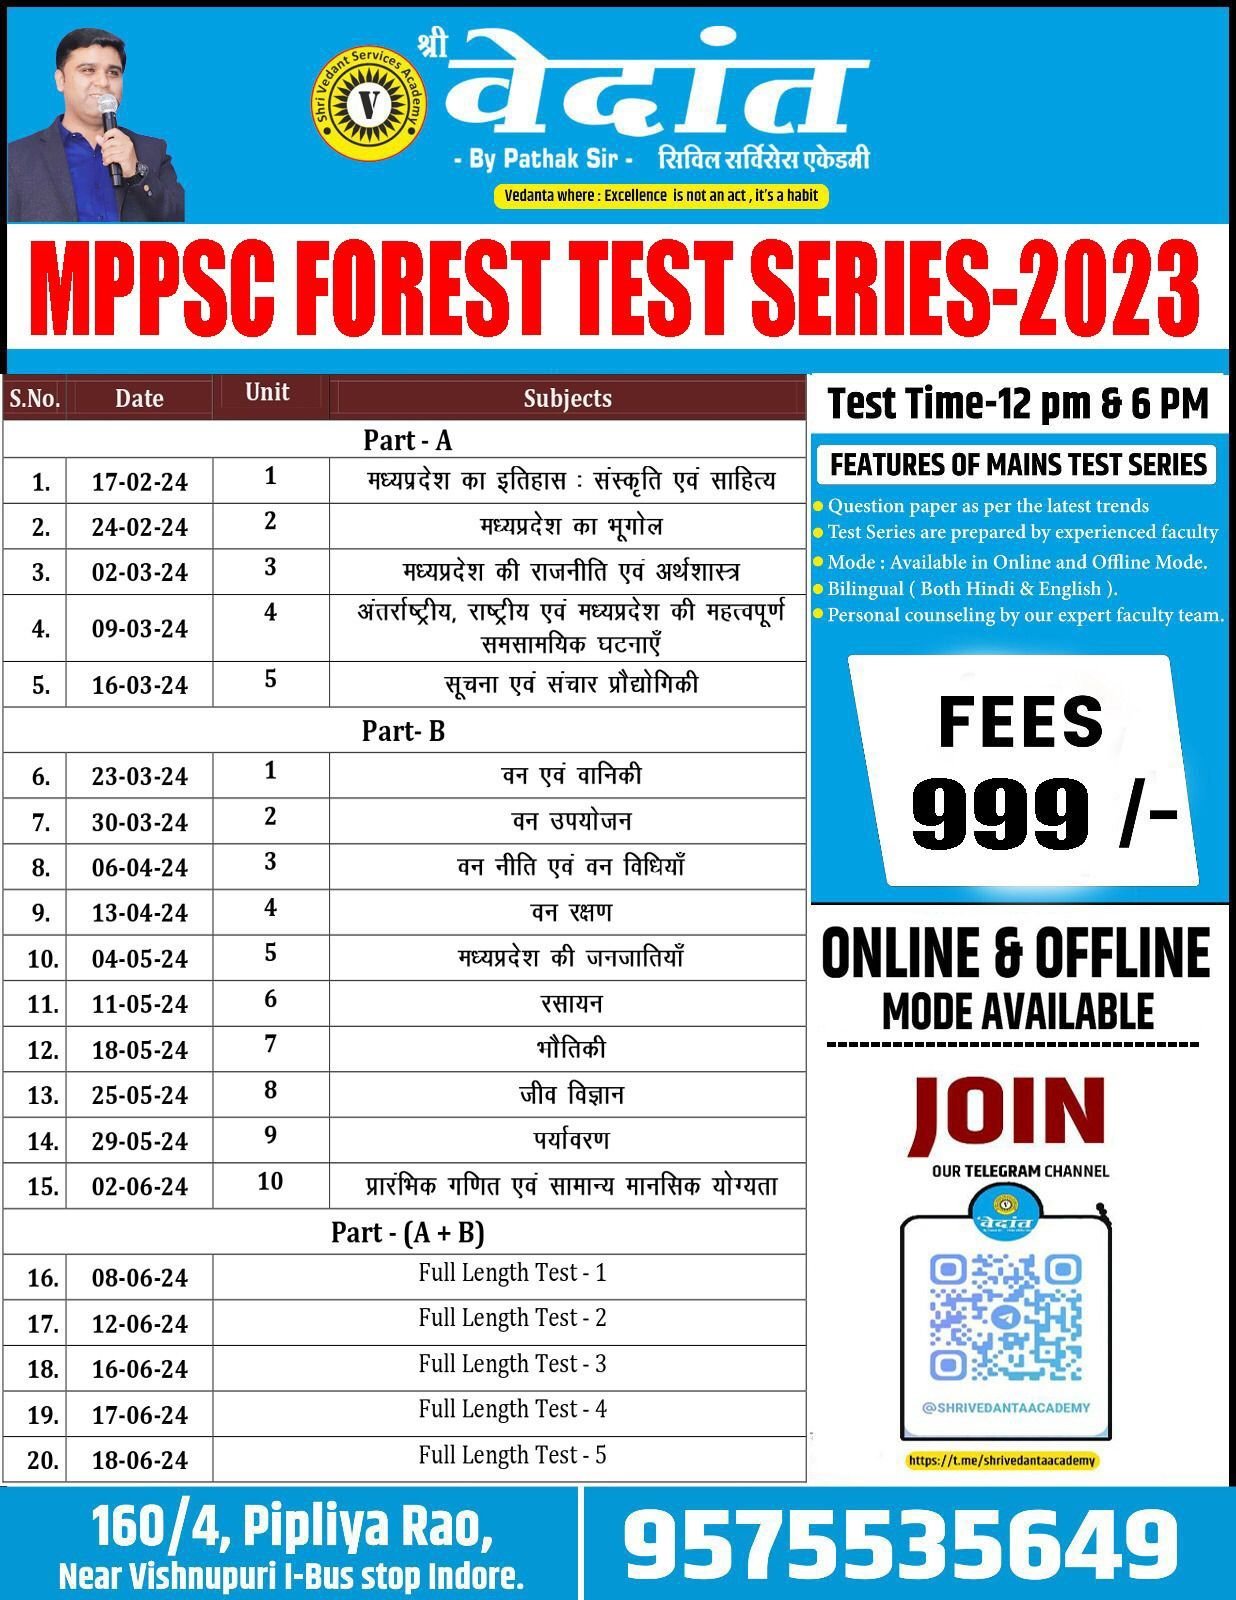 MPPSC FOREST MAINS TEST SERIES